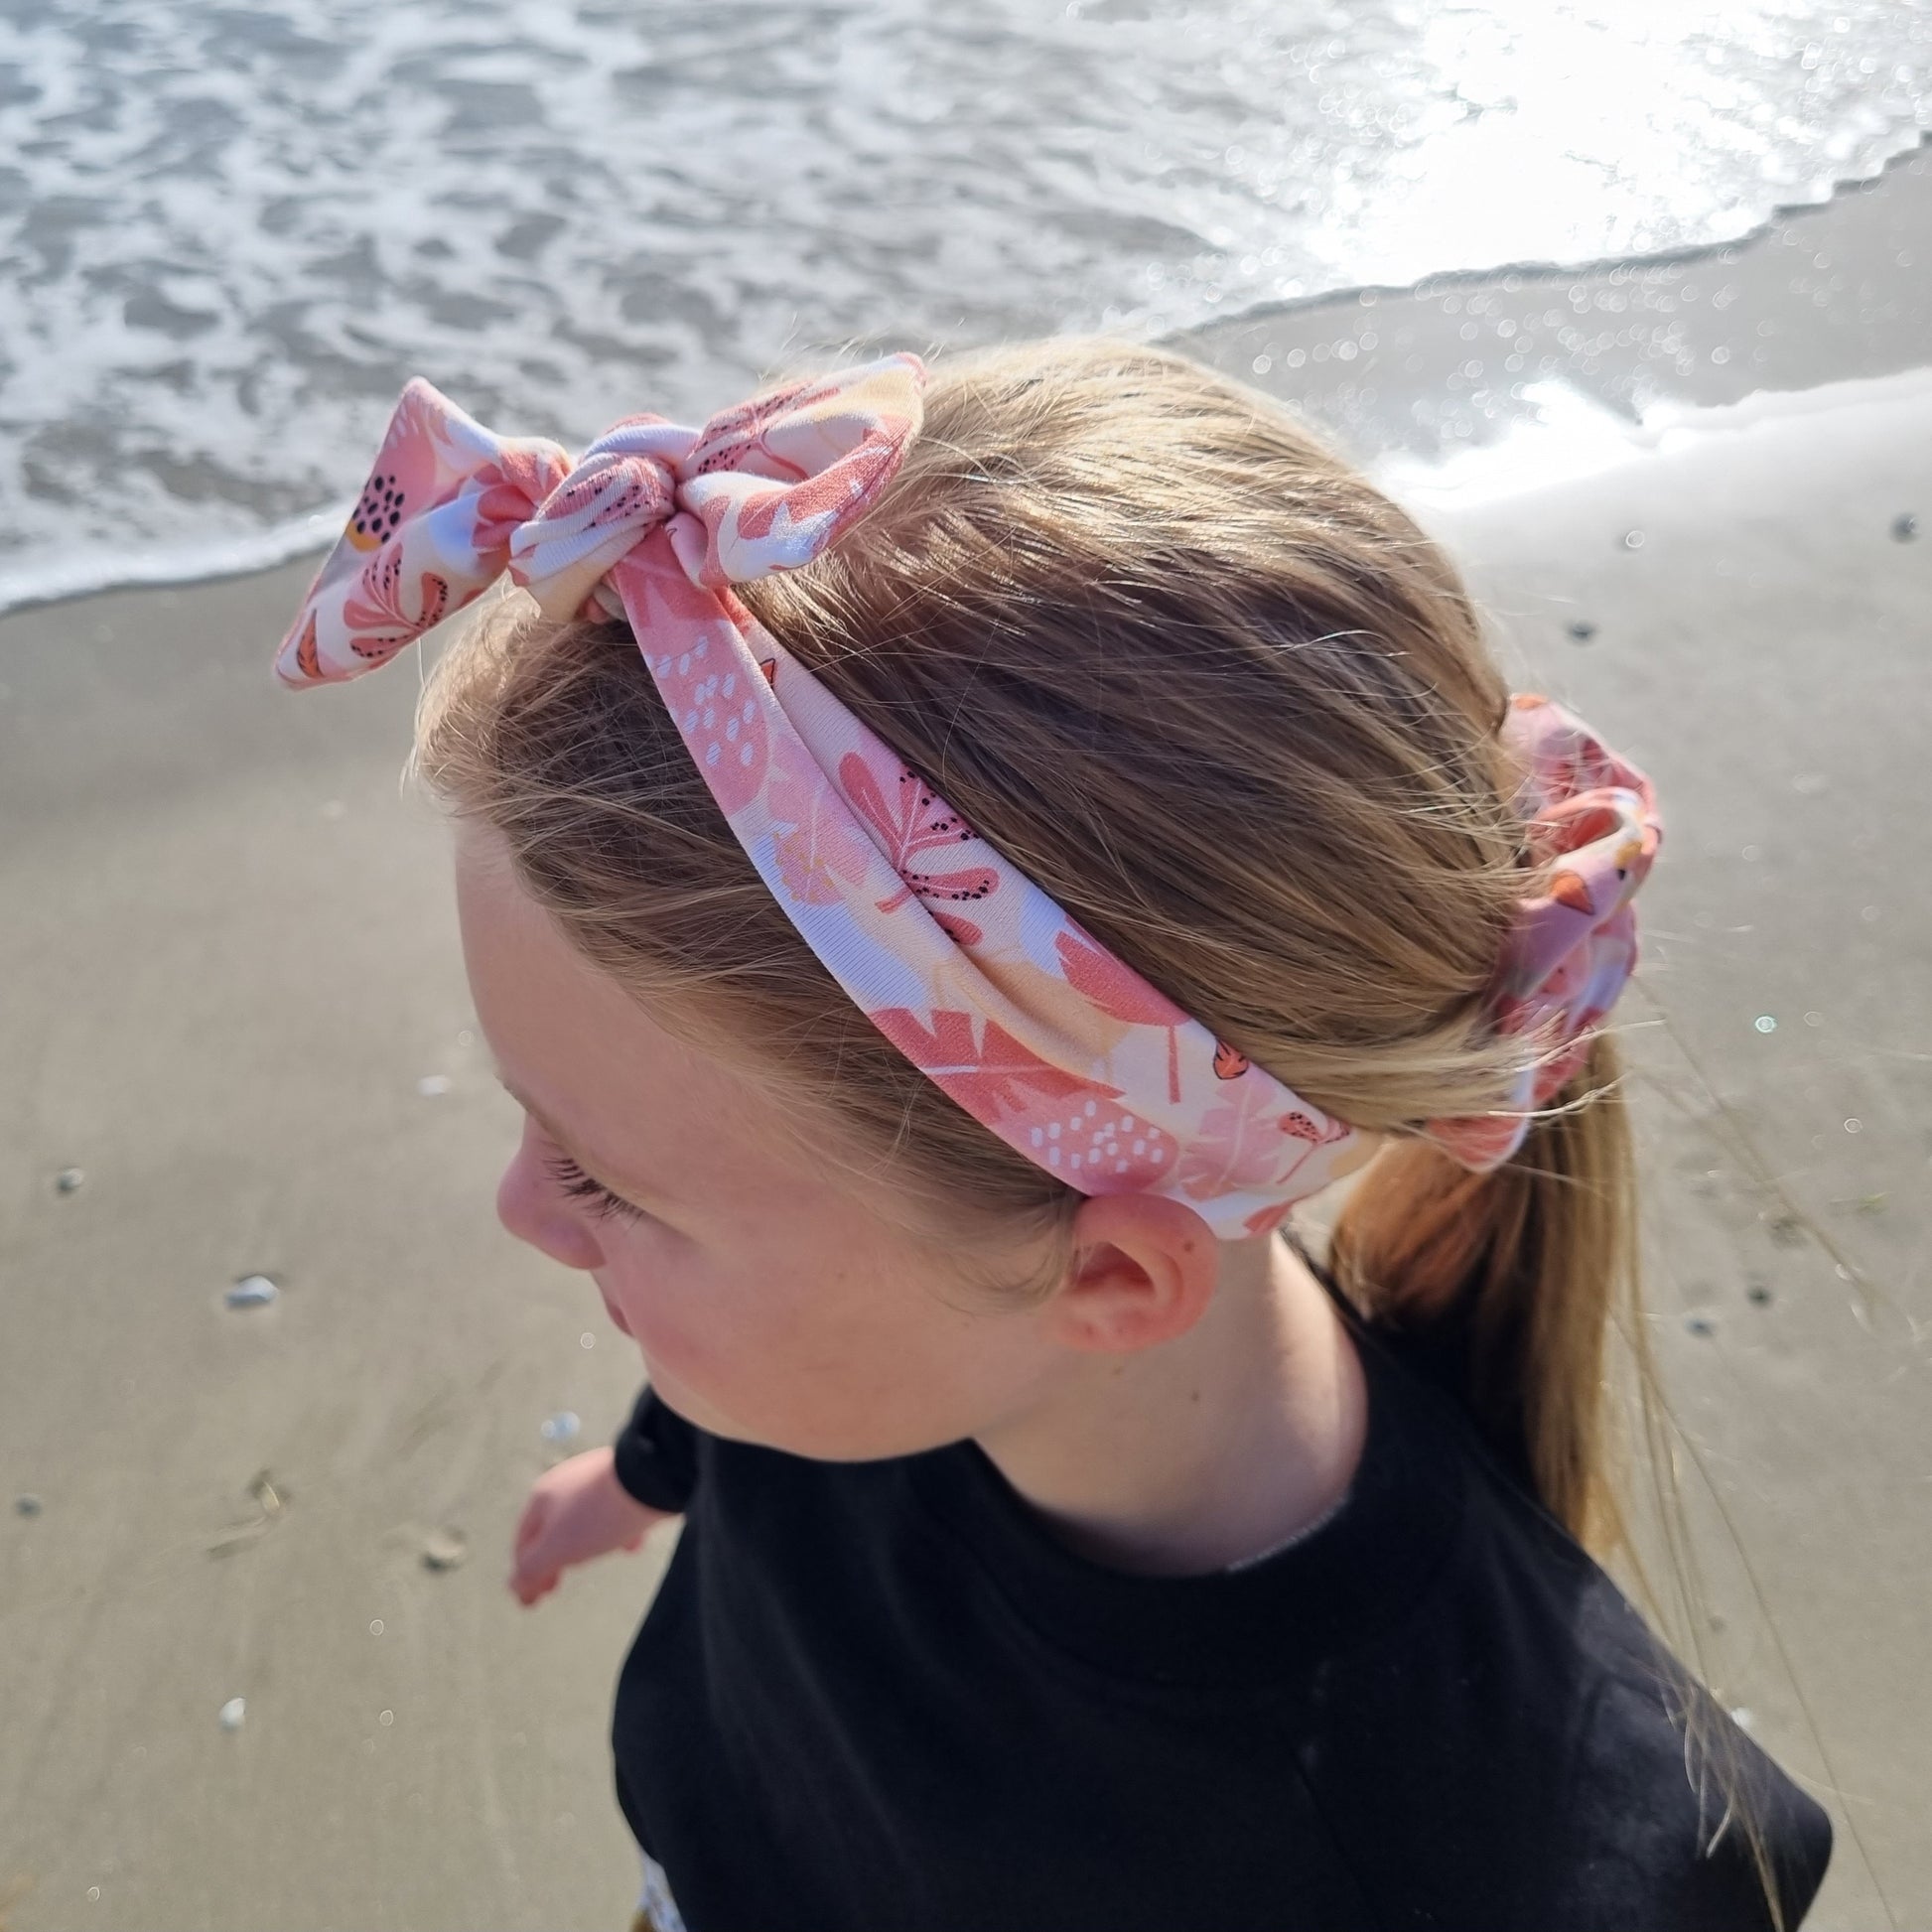 Top Knot Headband - Sara worn by a girl at the beach. Pink and orange leaves on white background. 